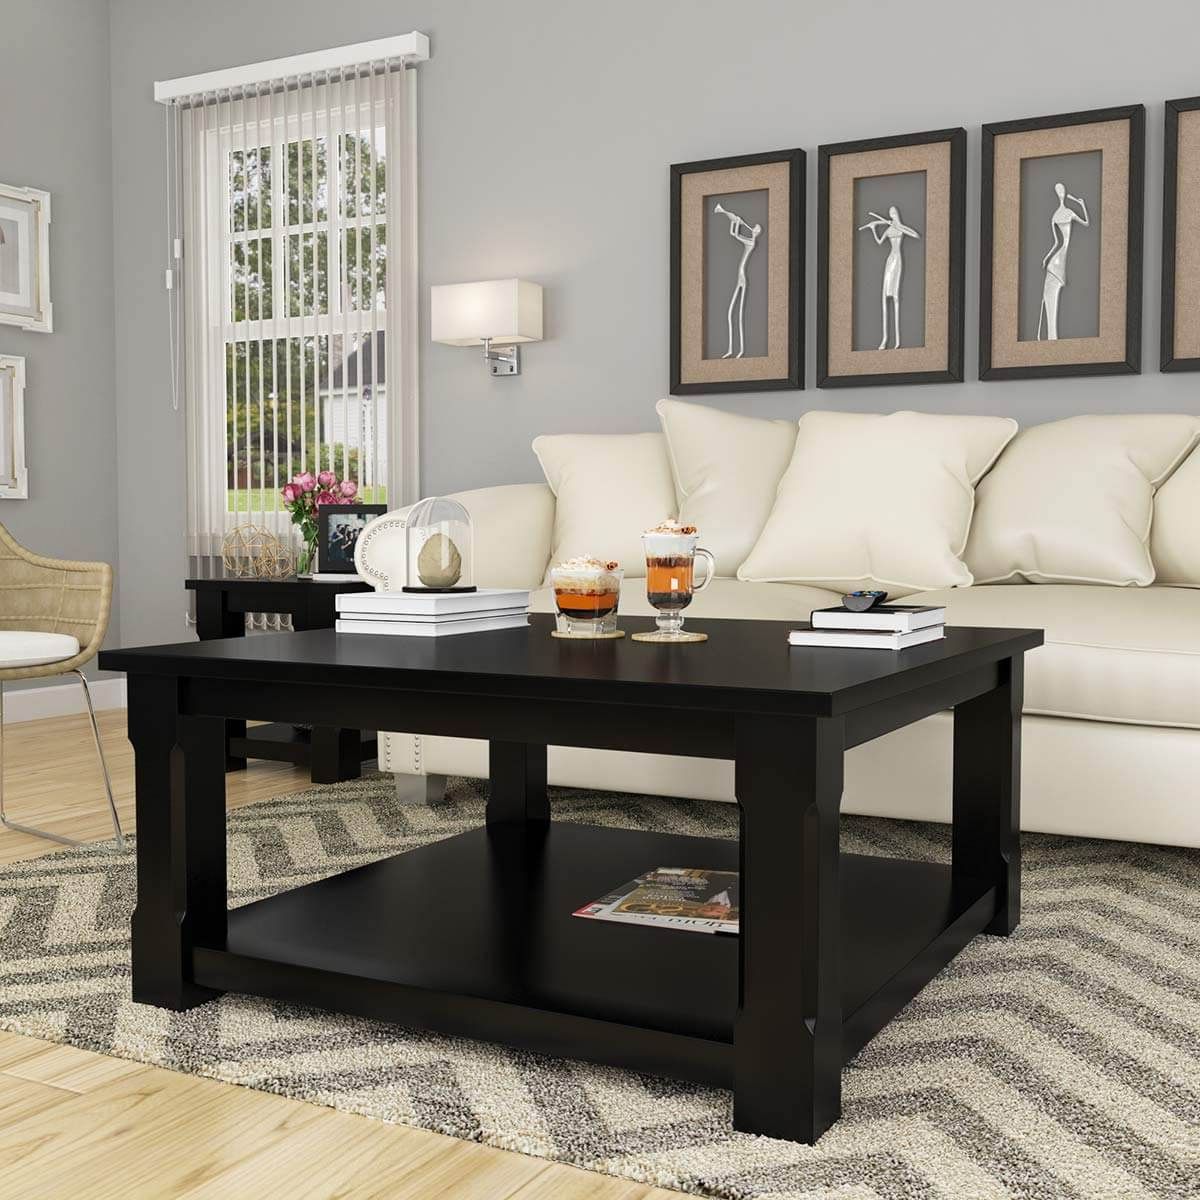 Brimson Contemporary Style Solid Wood 2 Tier Square Coffee Table Intended For Recent Modern 2 Tier Coffee Tables Coffee Tables (View 8 of 20)